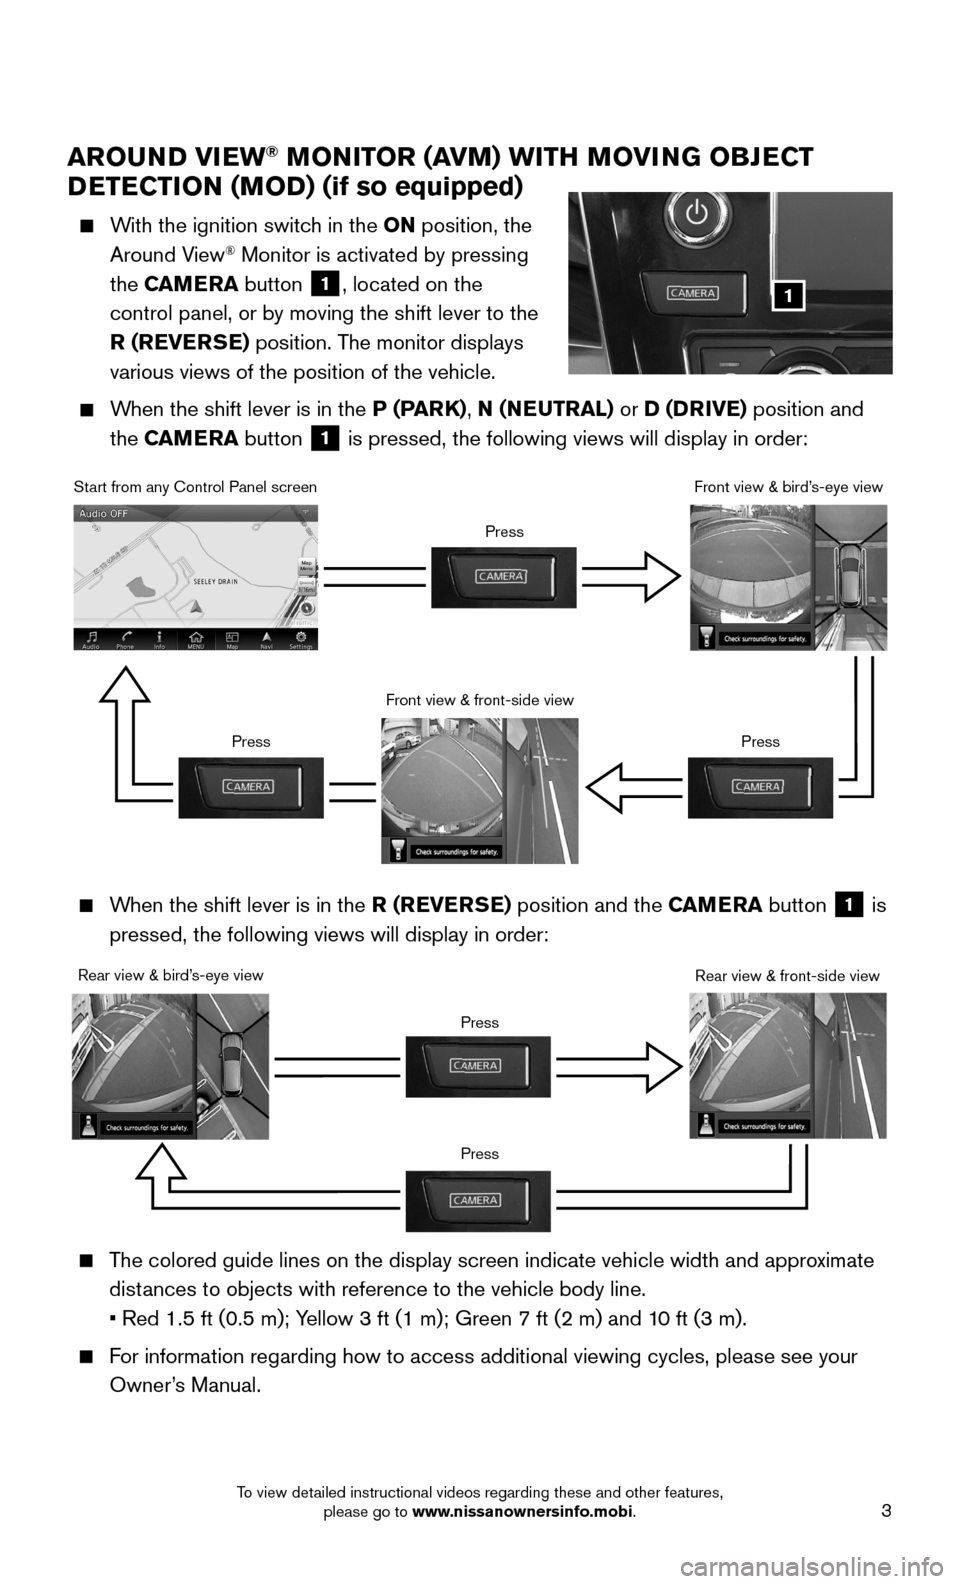 NISSAN MAXIMA 2016 A36 / 8.G Quick Reference Guide 3
AROUND VIEW® MONITOR (AVM) WITH MOVING OBJECT 
DETECTION (MOD) (if so equipped)
    With the ignition switch in the ON position, the 
Around View® Monitor is activated by pressing 
the CAMERA butt